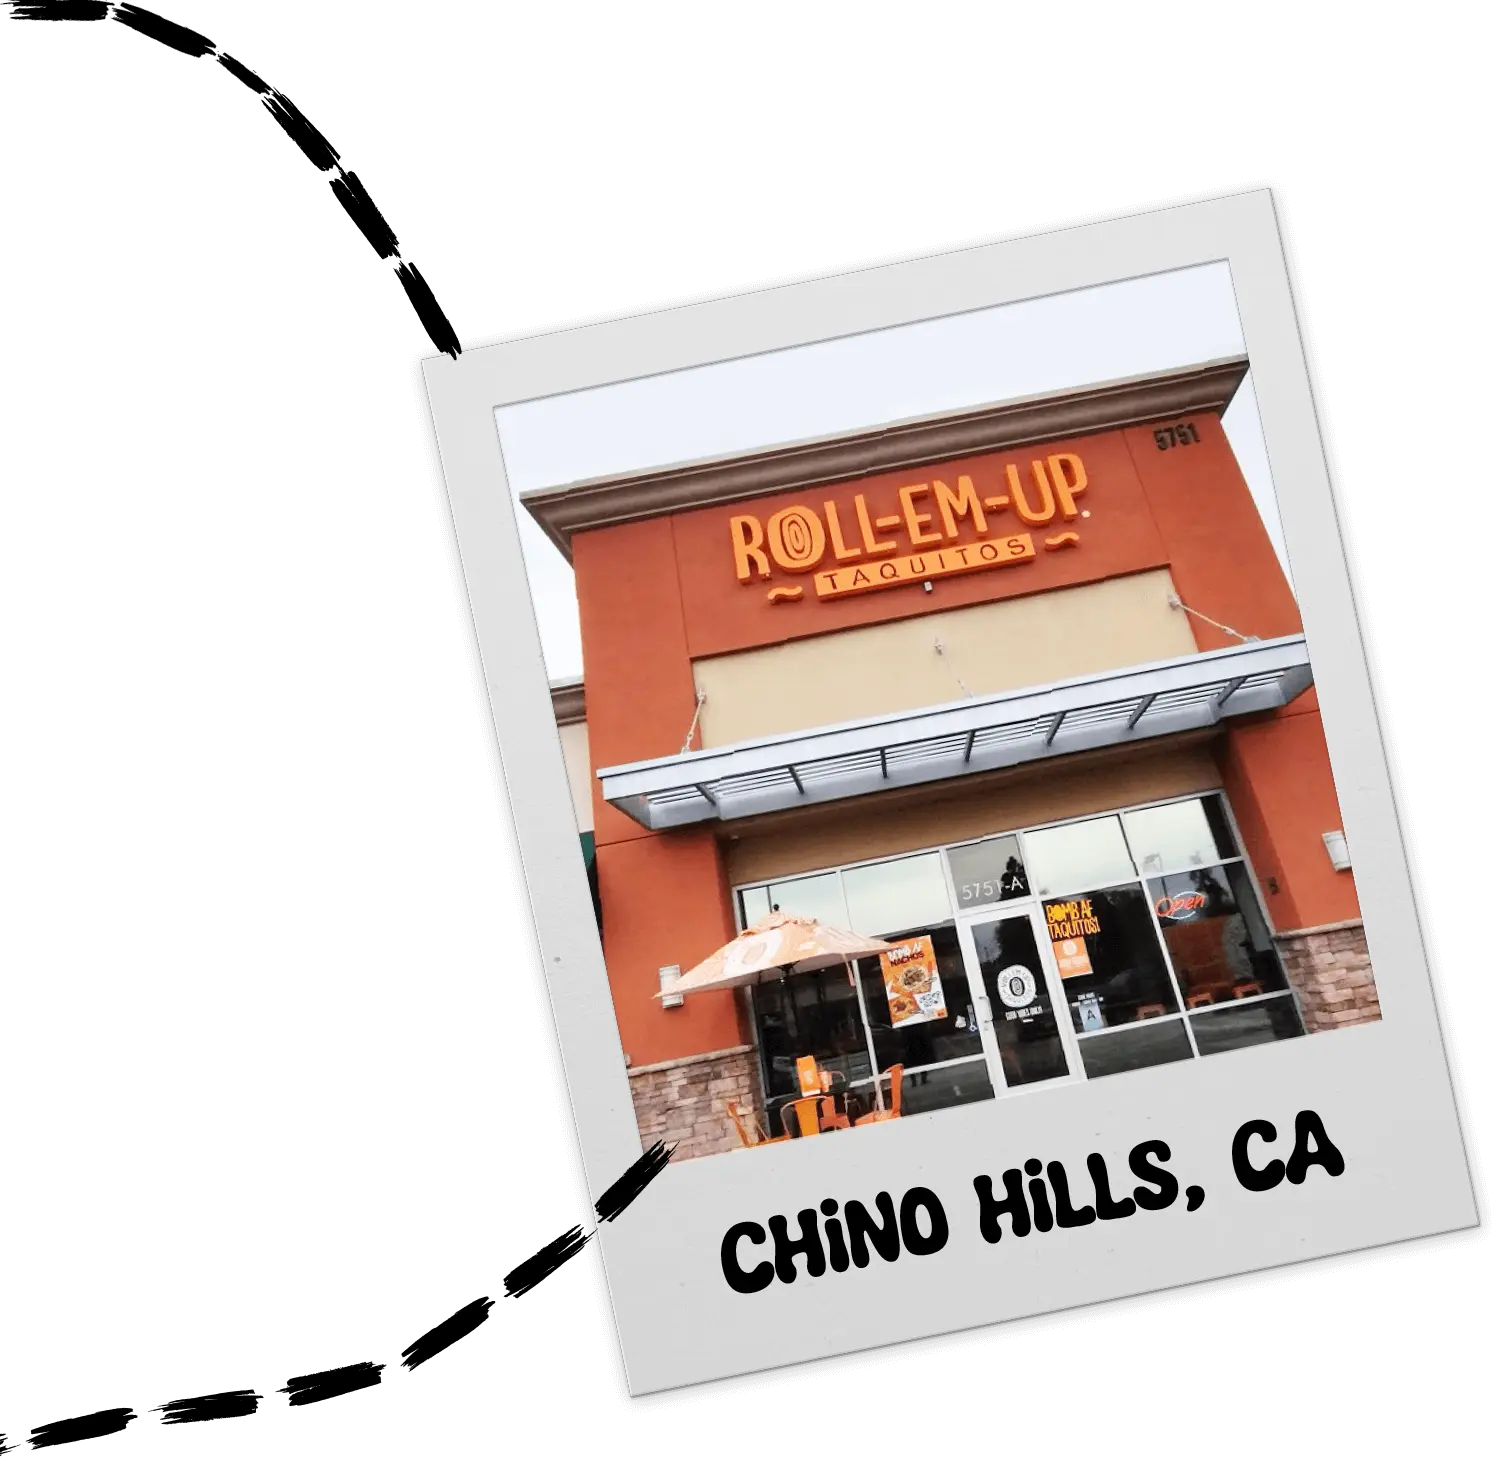 Our Story - Chino Hills